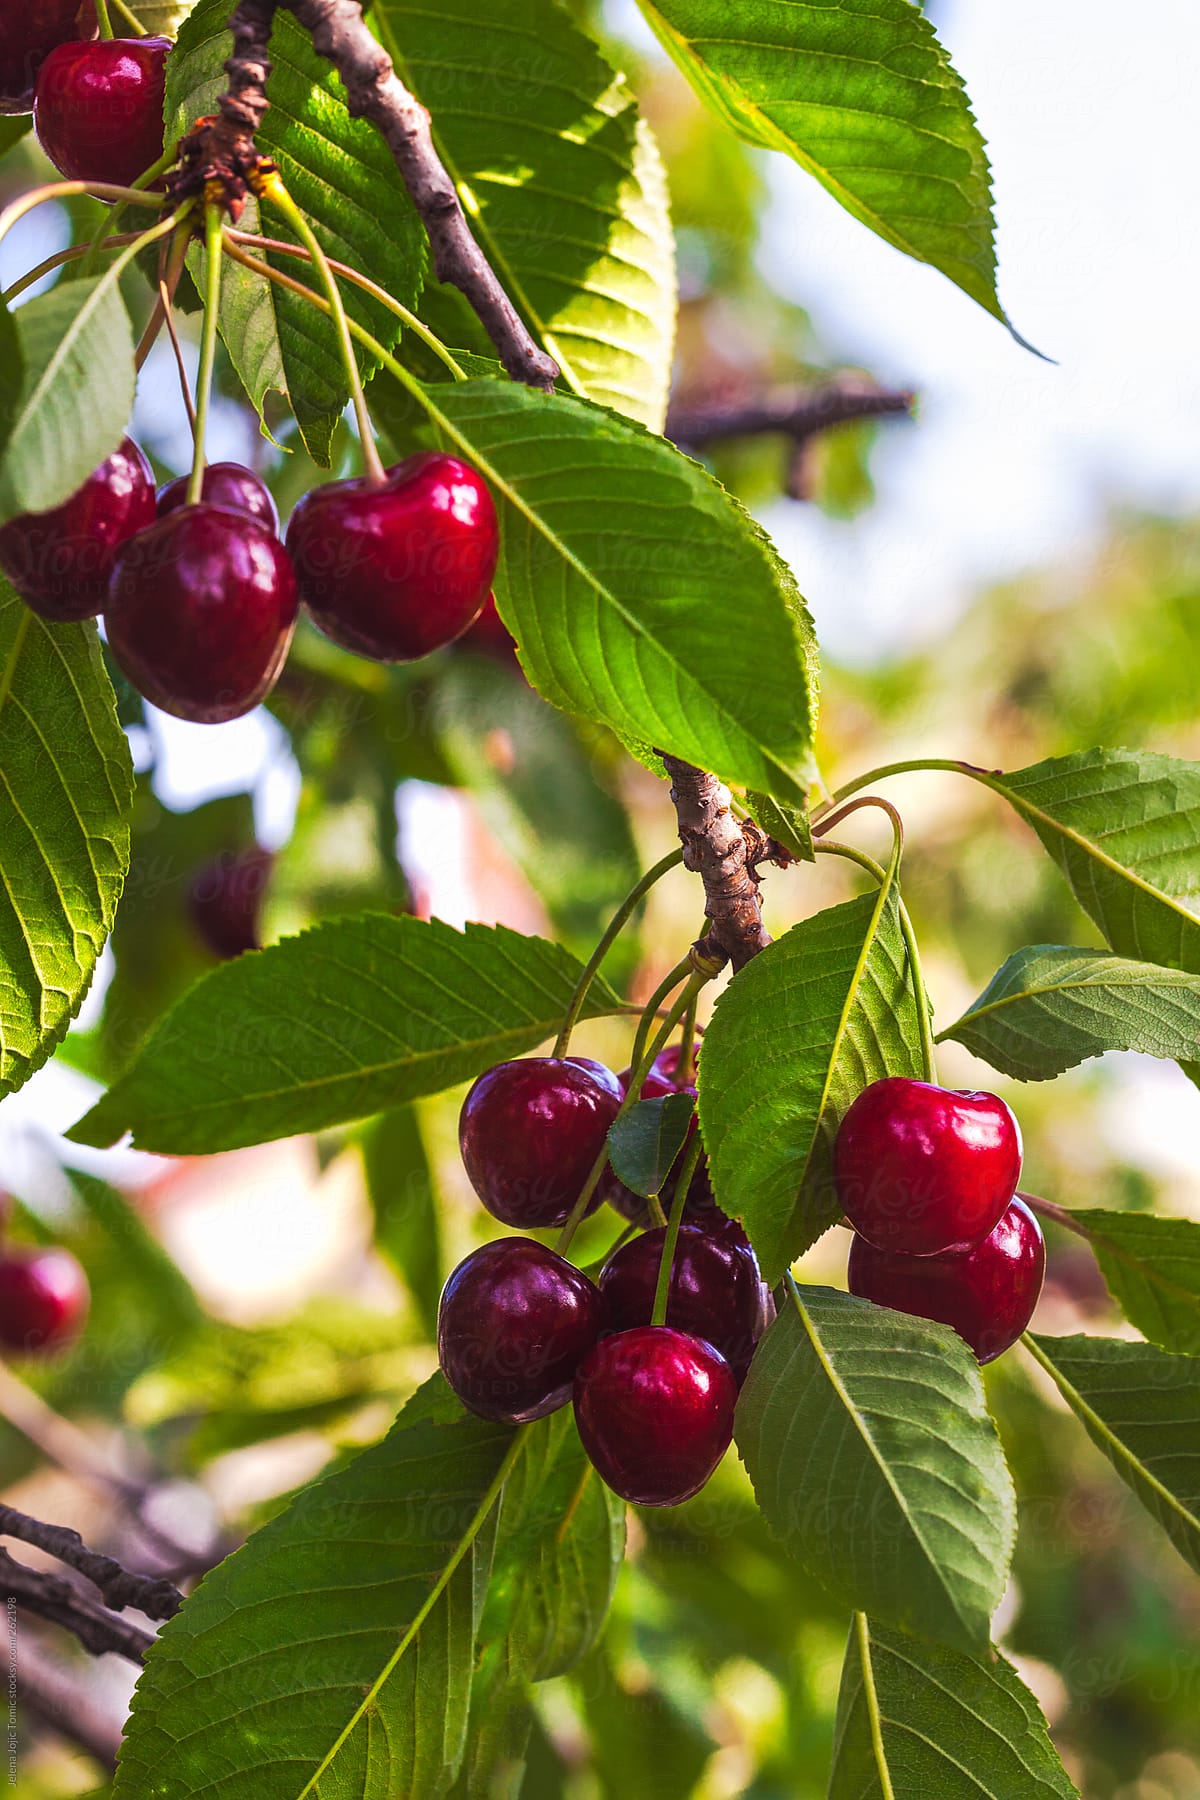 download the new version for mac CherryTree 0.99.56